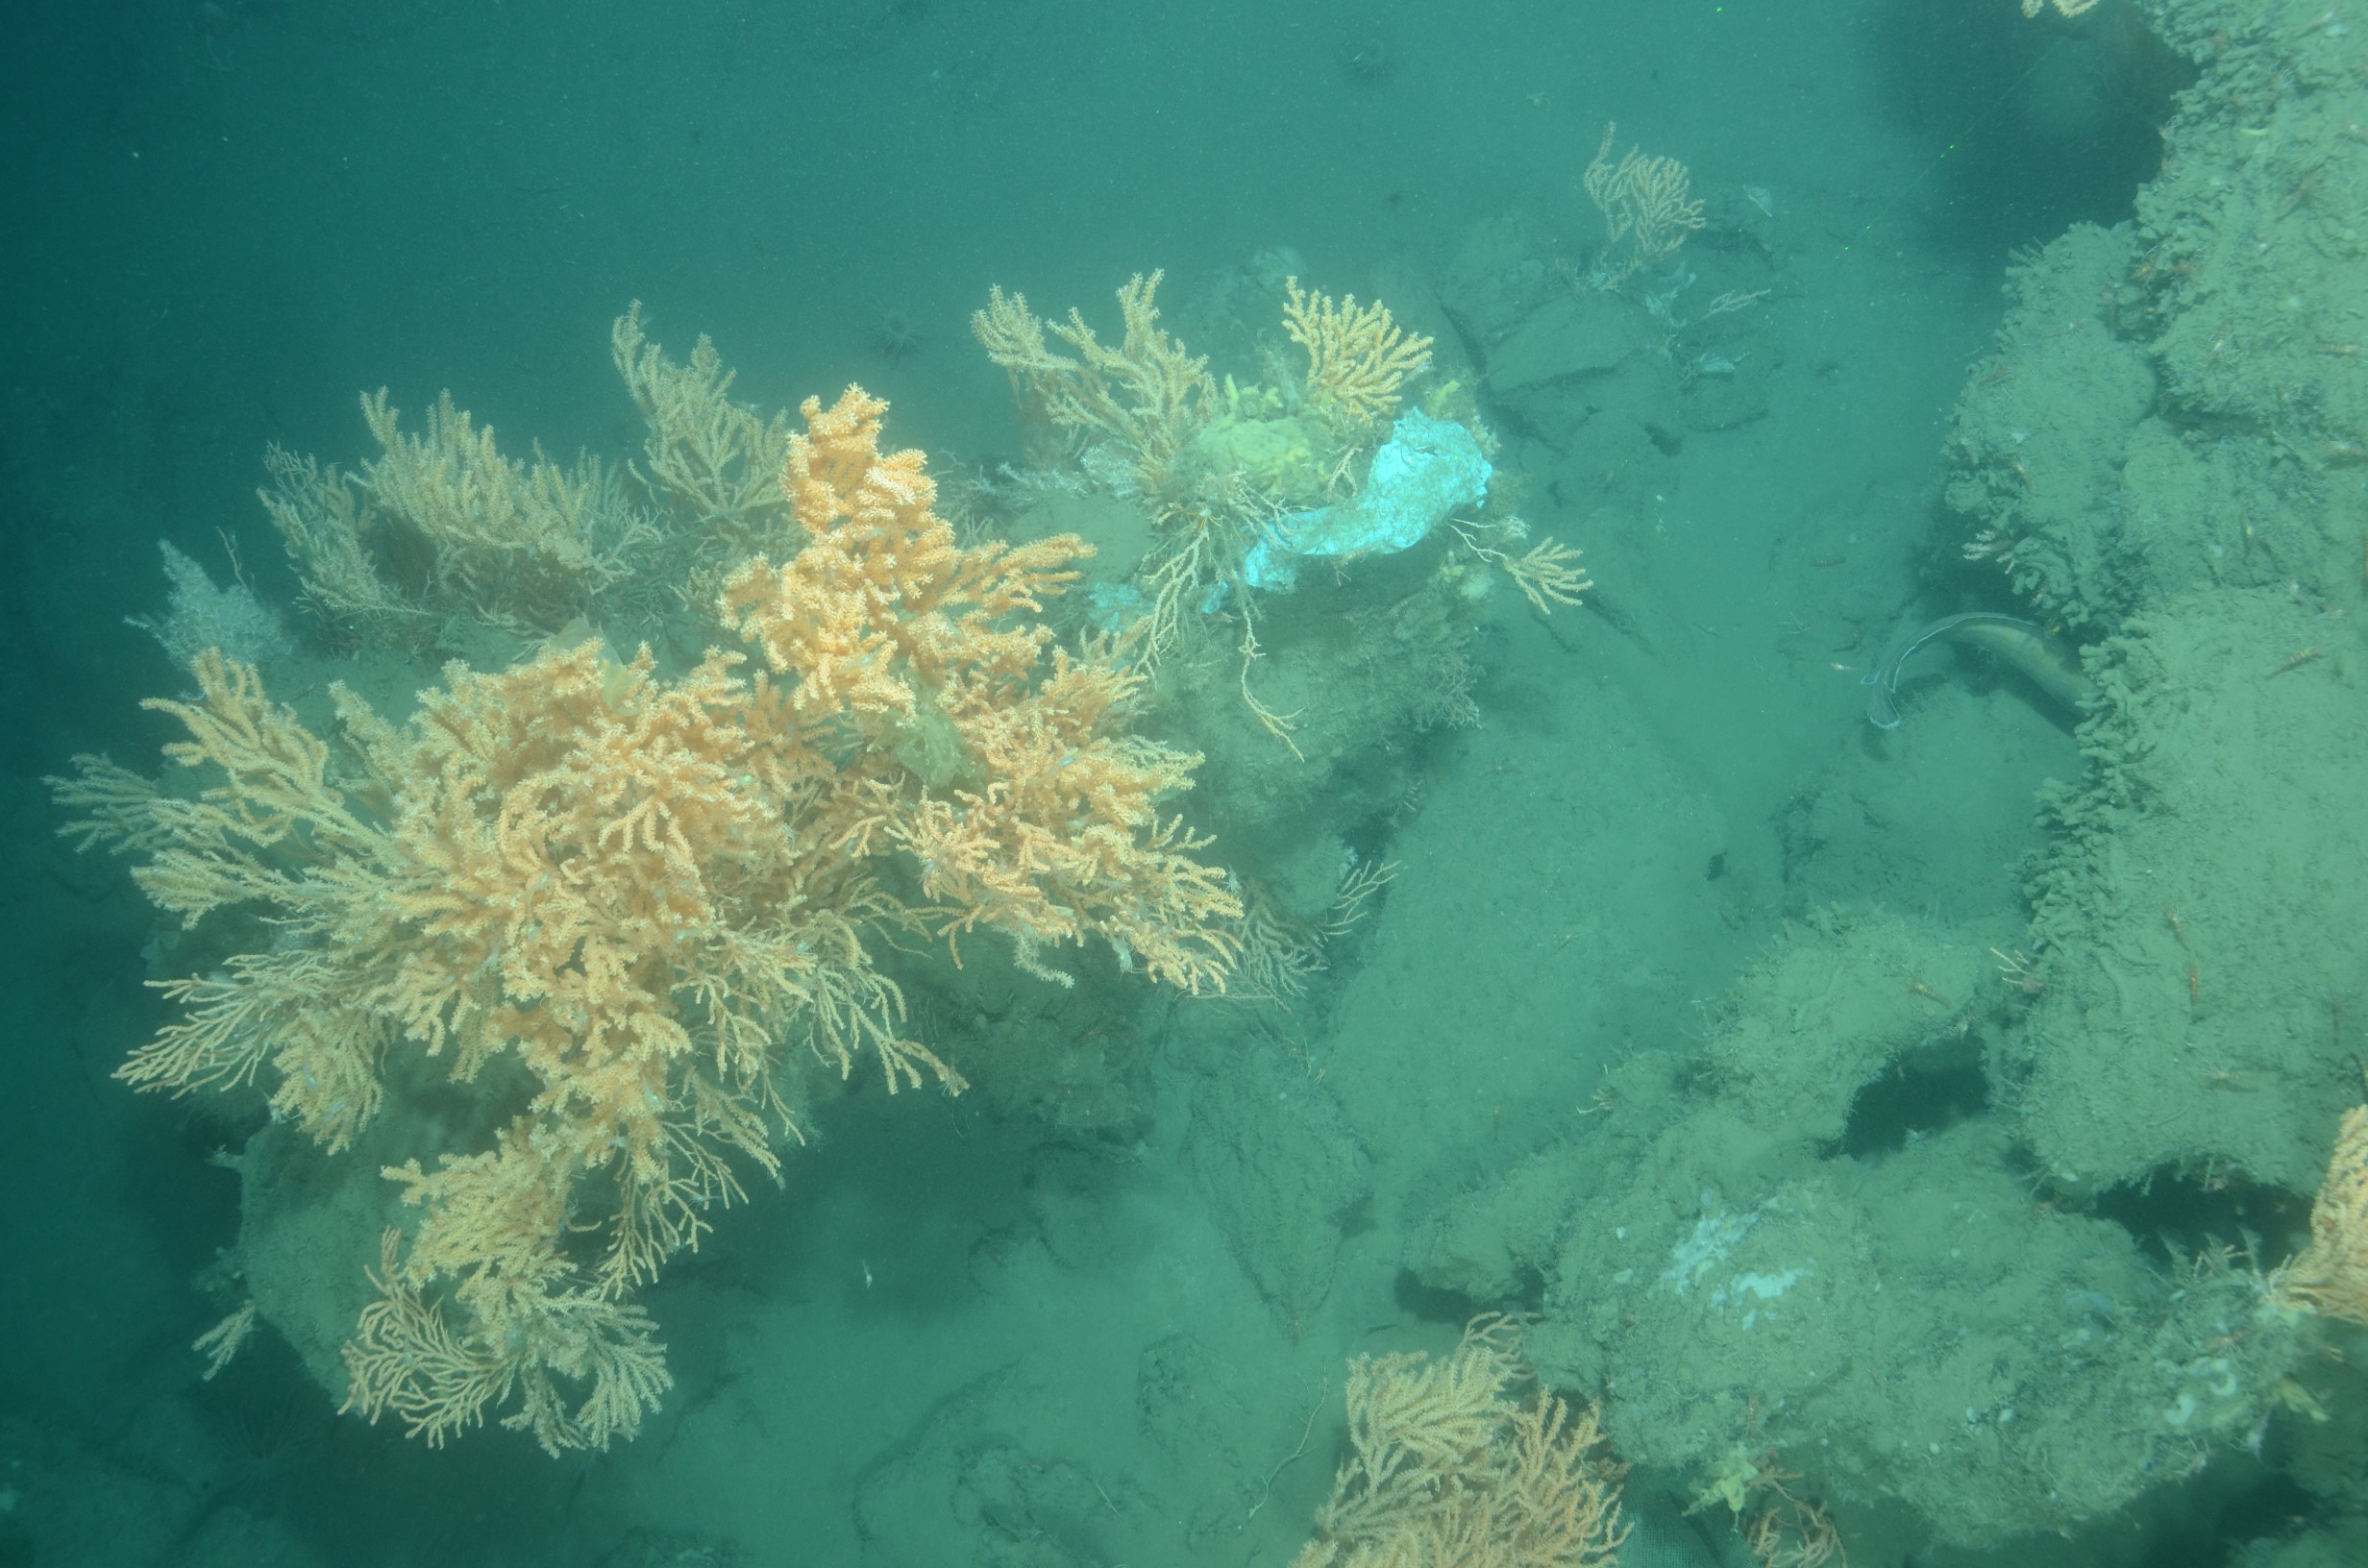 Large assemblages of acanthogorgid-like corals on rocks at 500 meters in Wilmington Canyon. Note the white plastic bag entangled in the corals